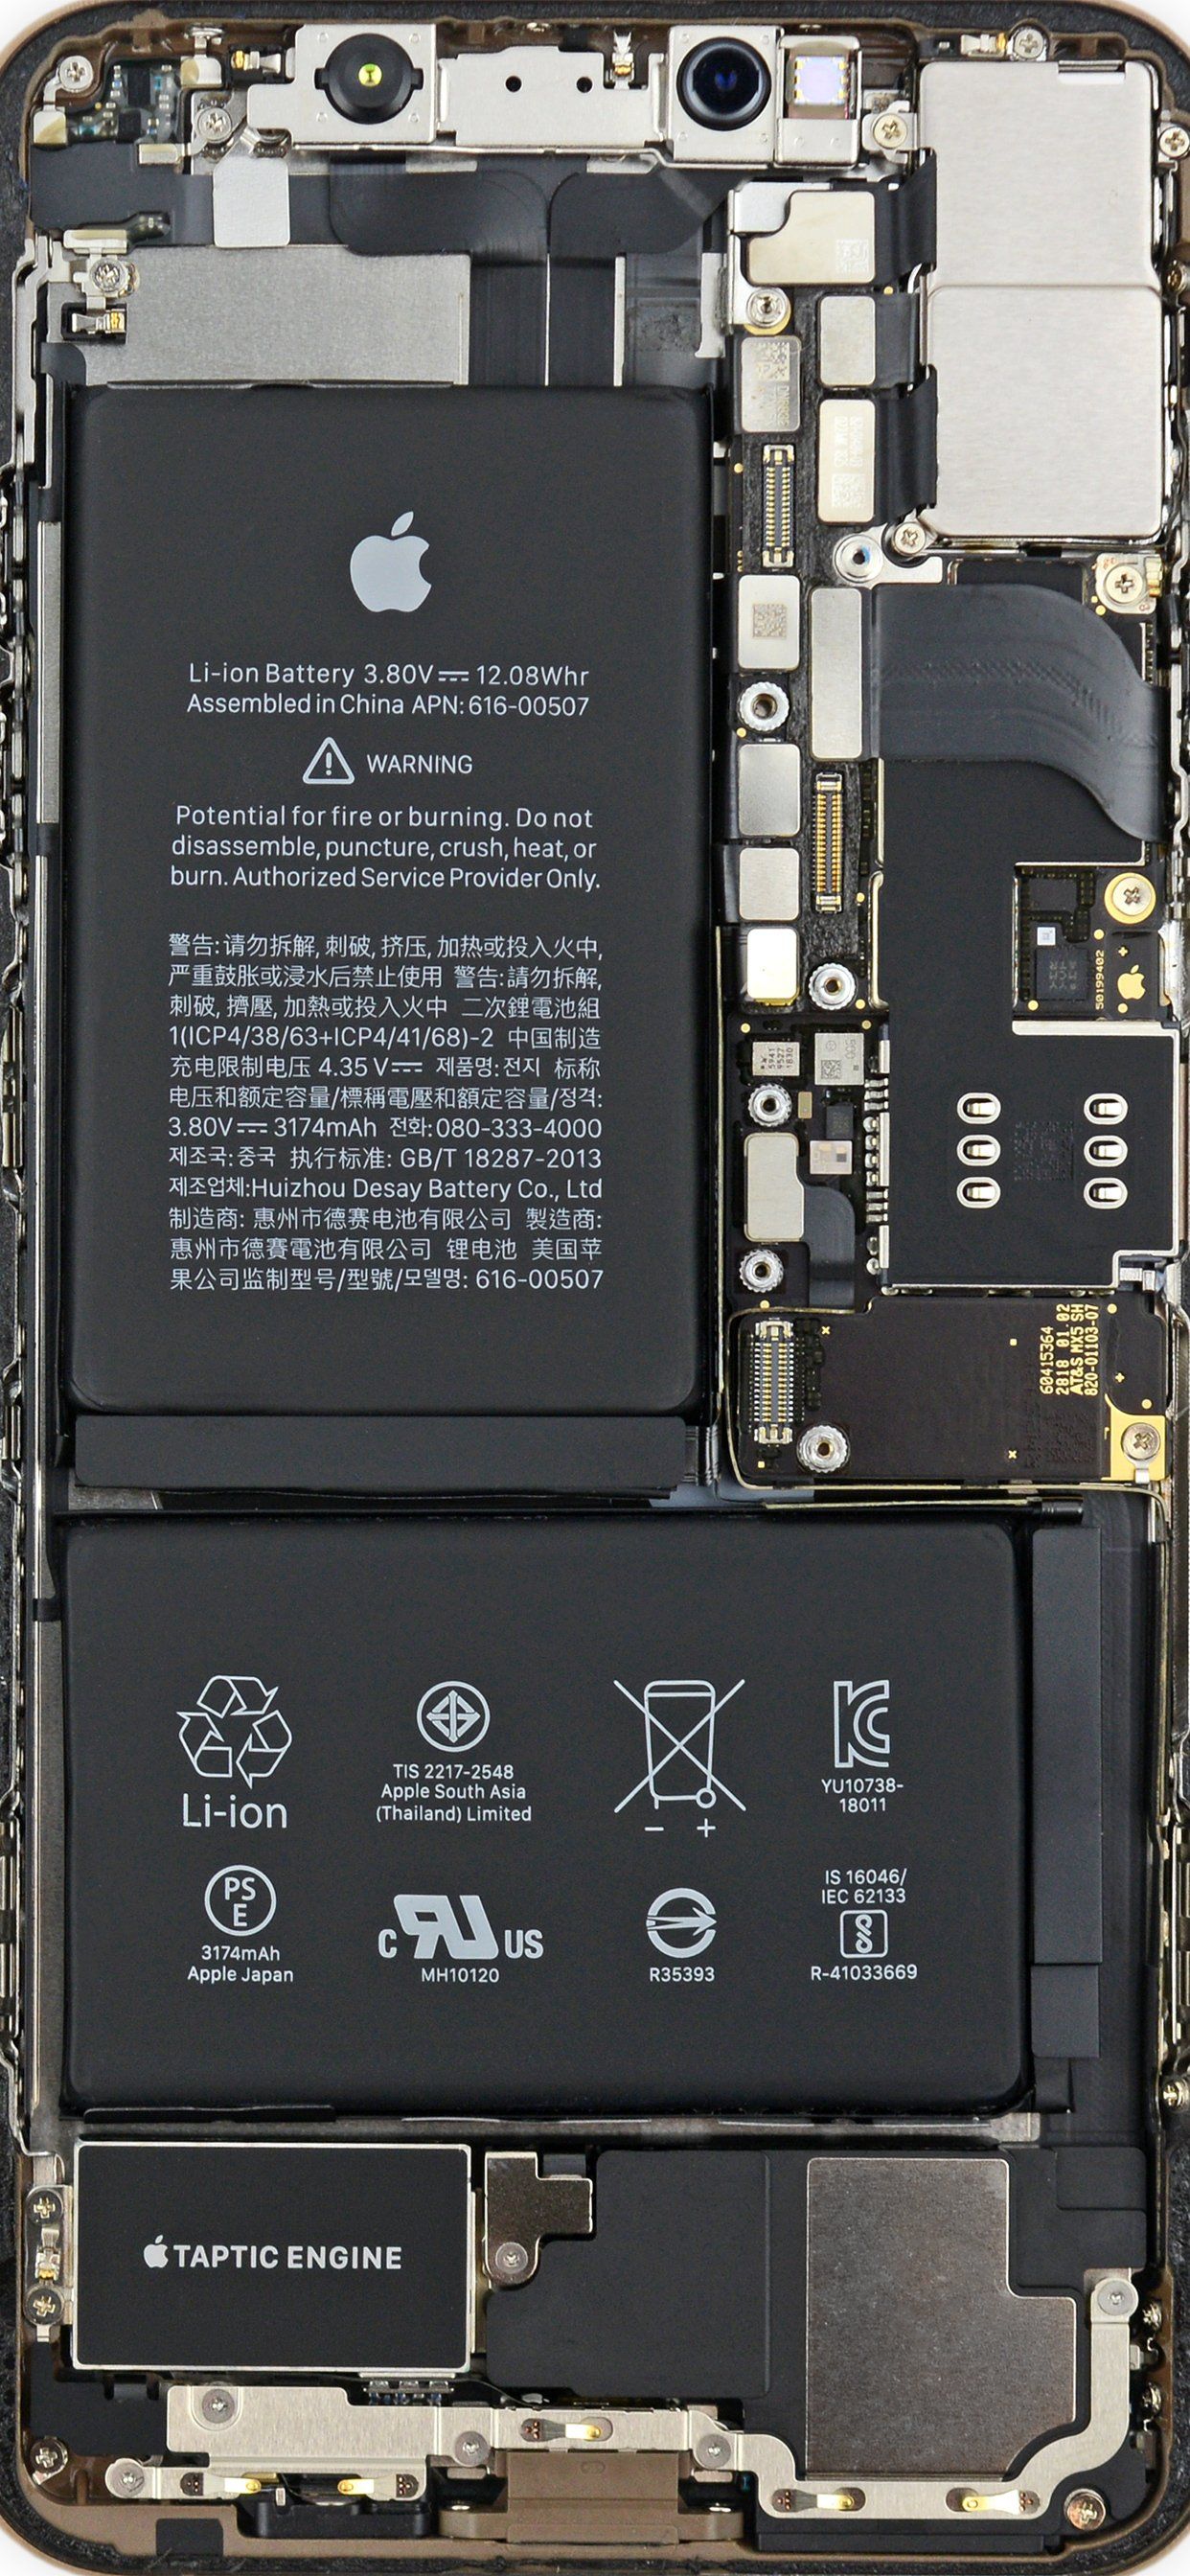 Double the iPhone XS Teardowns = Double the Wallpaper